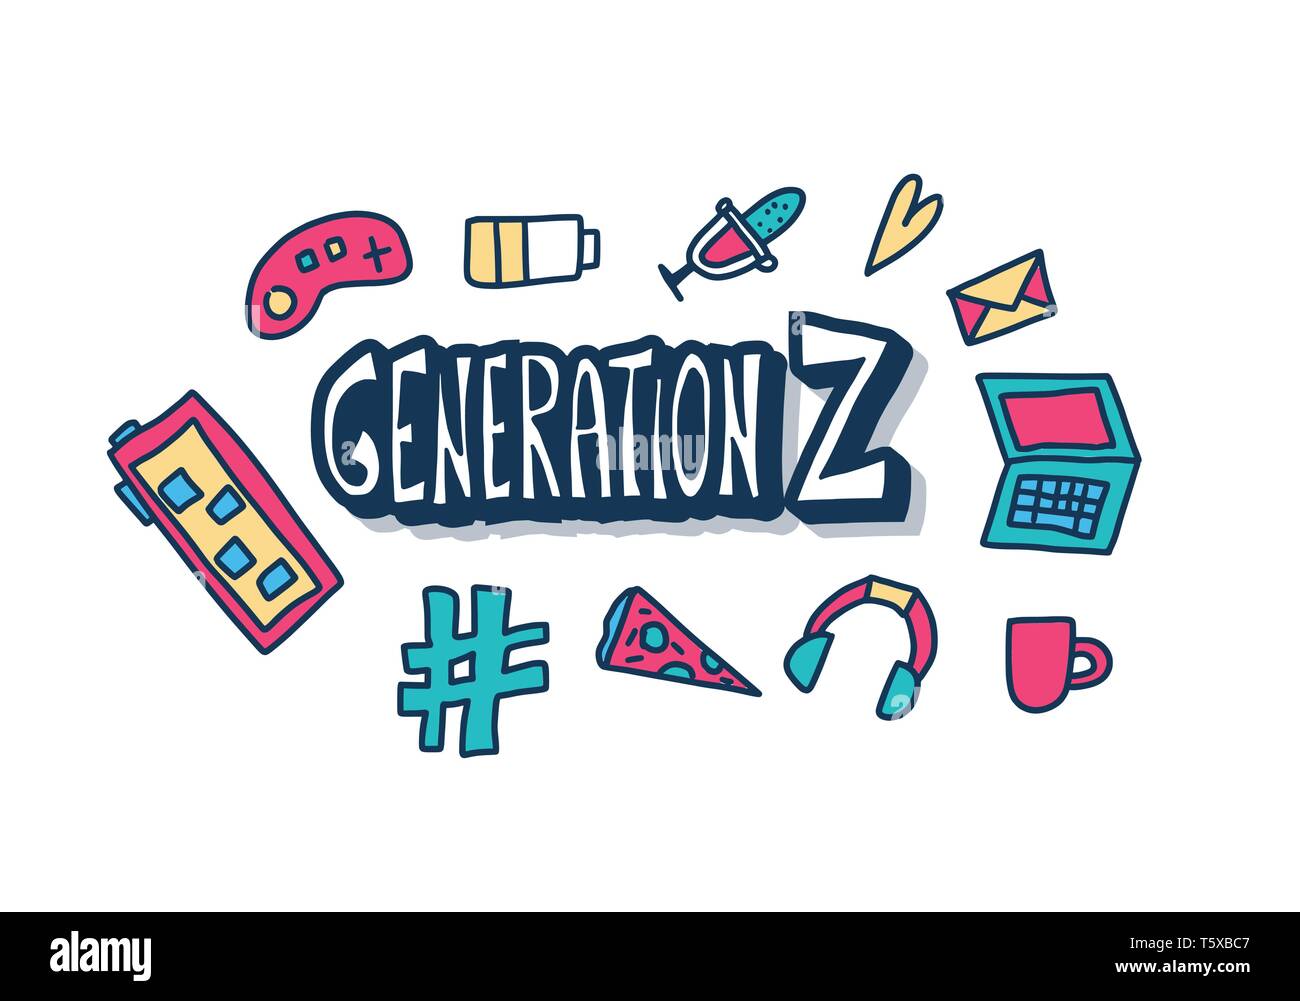 6 Ways to Engage With Generation Z